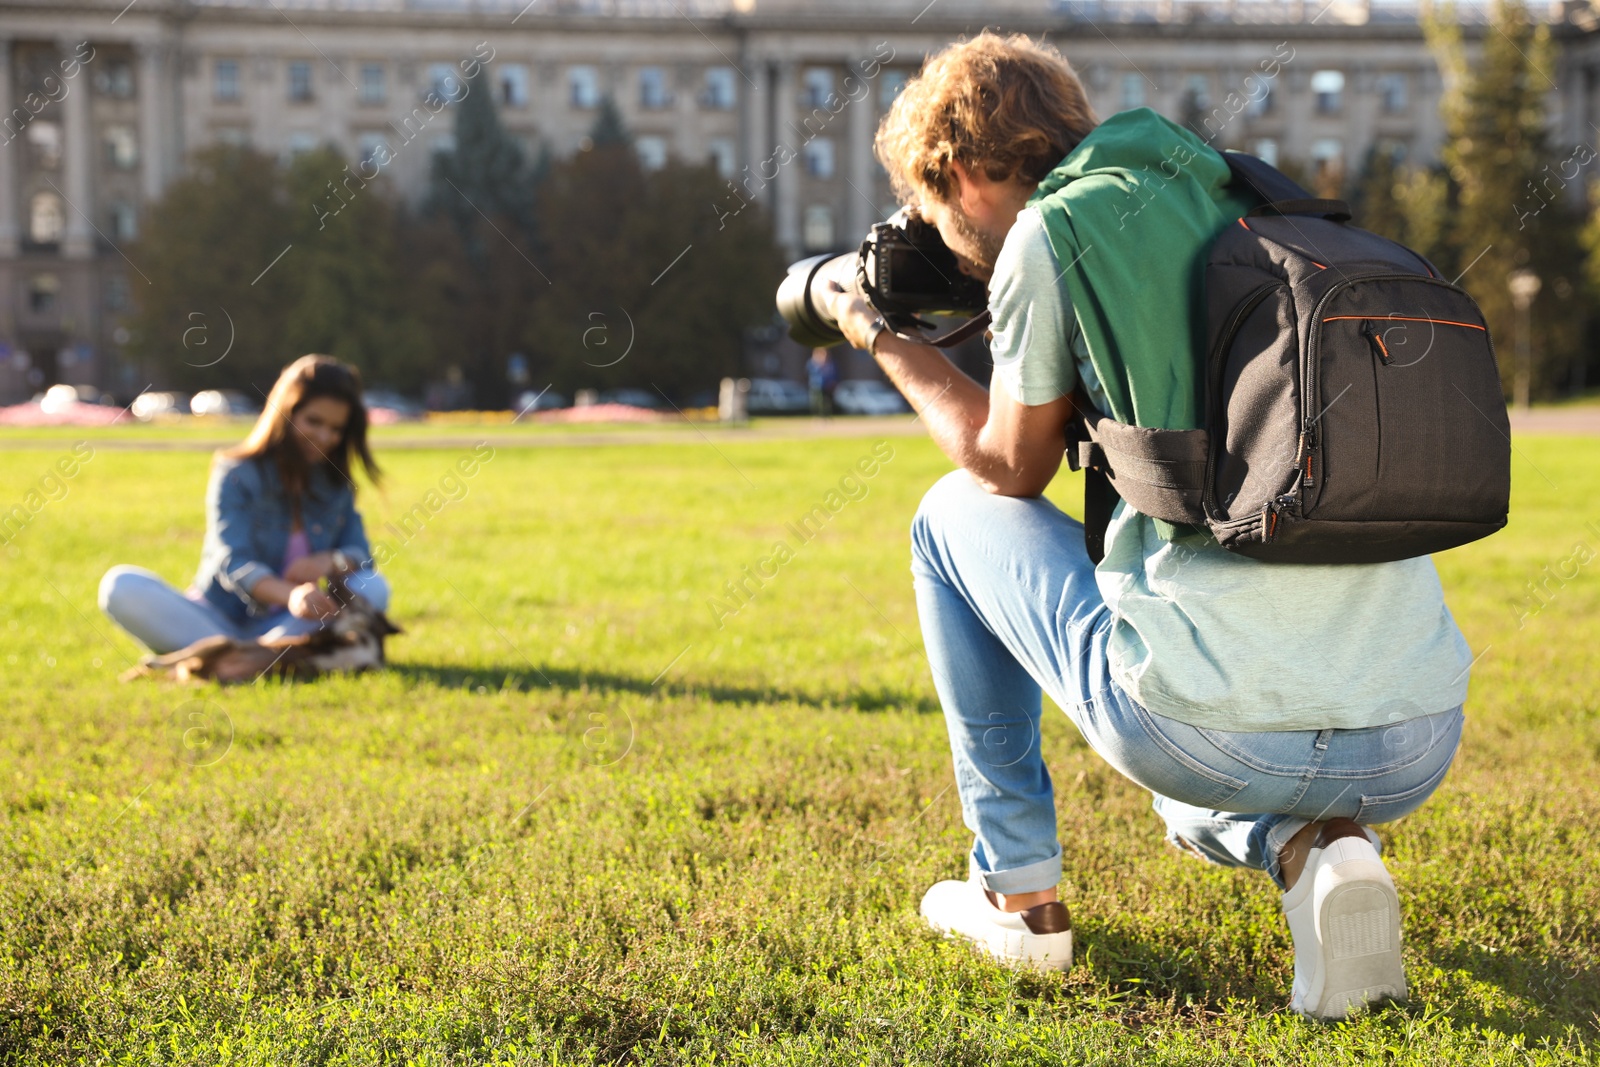 Photo of Male photographer taking photo of young woman with professional camera on grass outdoors